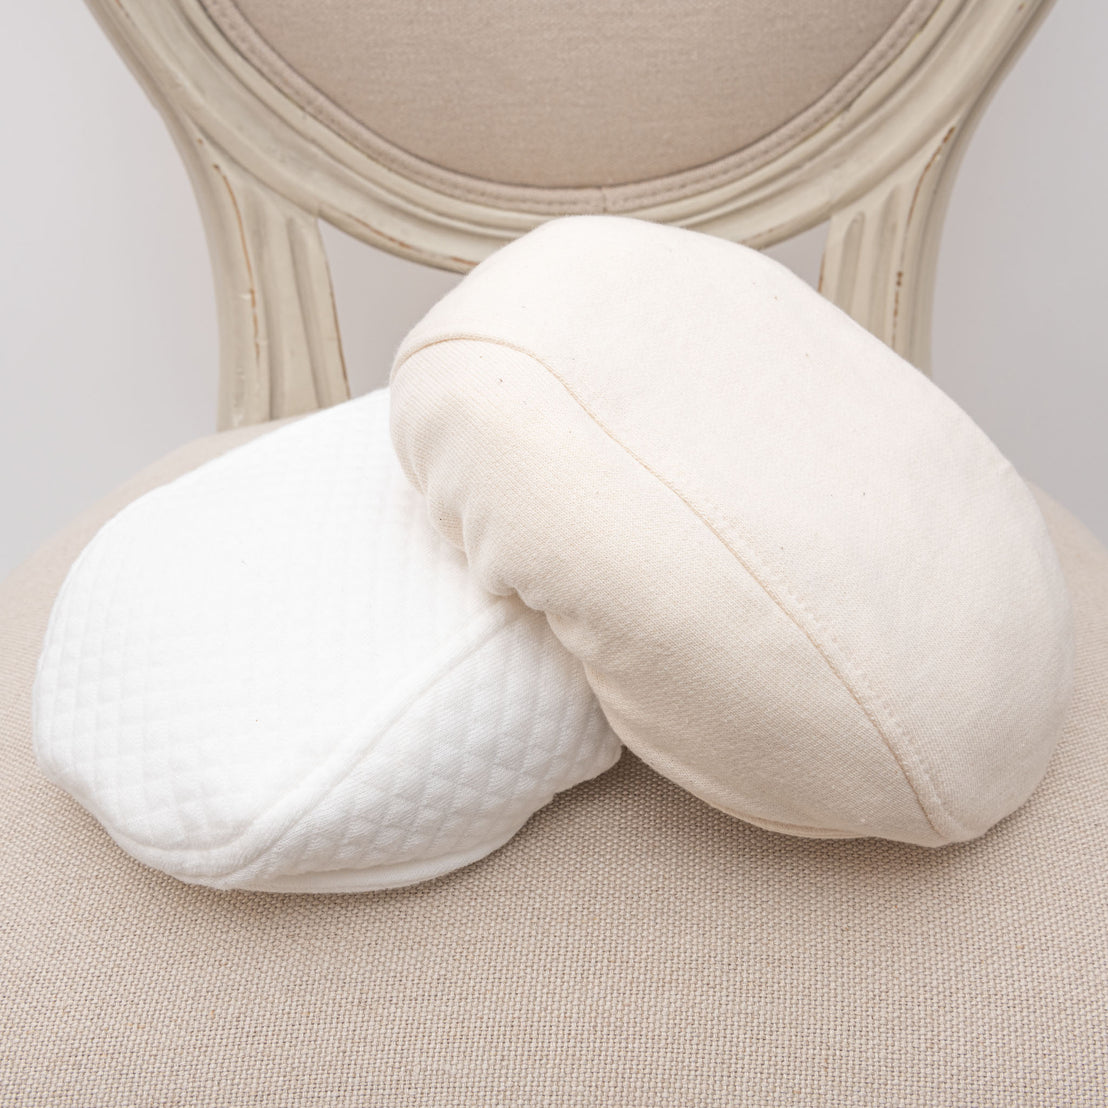 Flat lay photo of both types of Braden Newsboy Caps, including the white quilt and ivory french terry